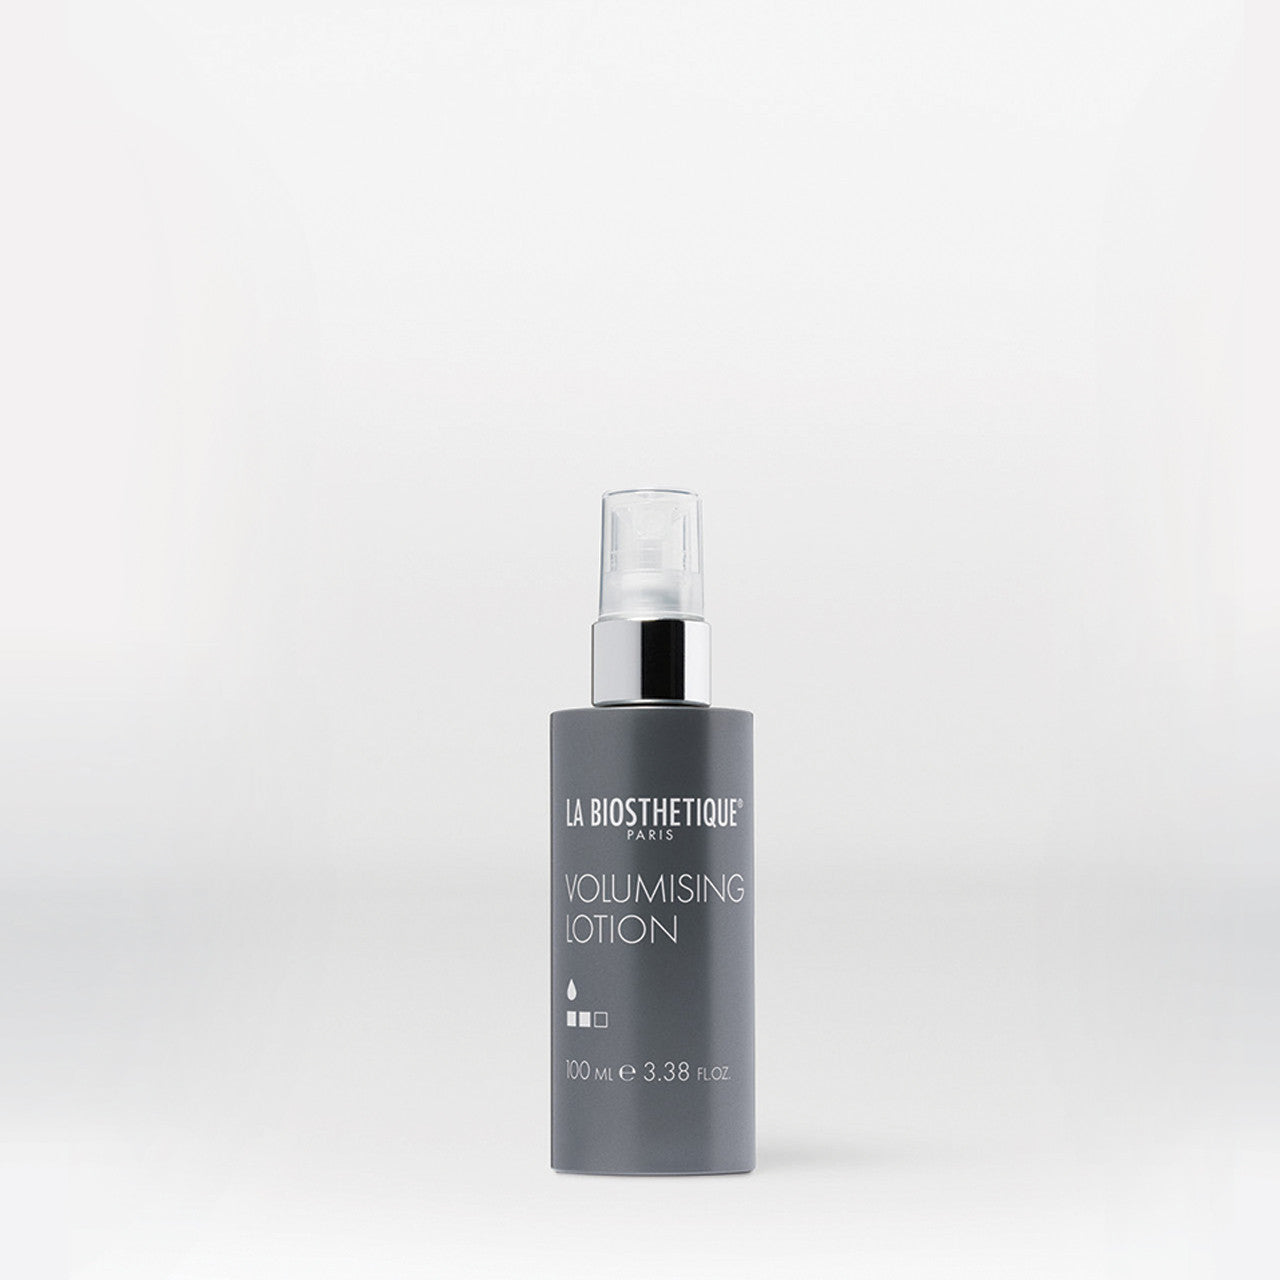 La Biosthetique's Volumising Lotion - This blow-drying lotion gives fine hair more volume with lasting and reliable medium to strong hold.